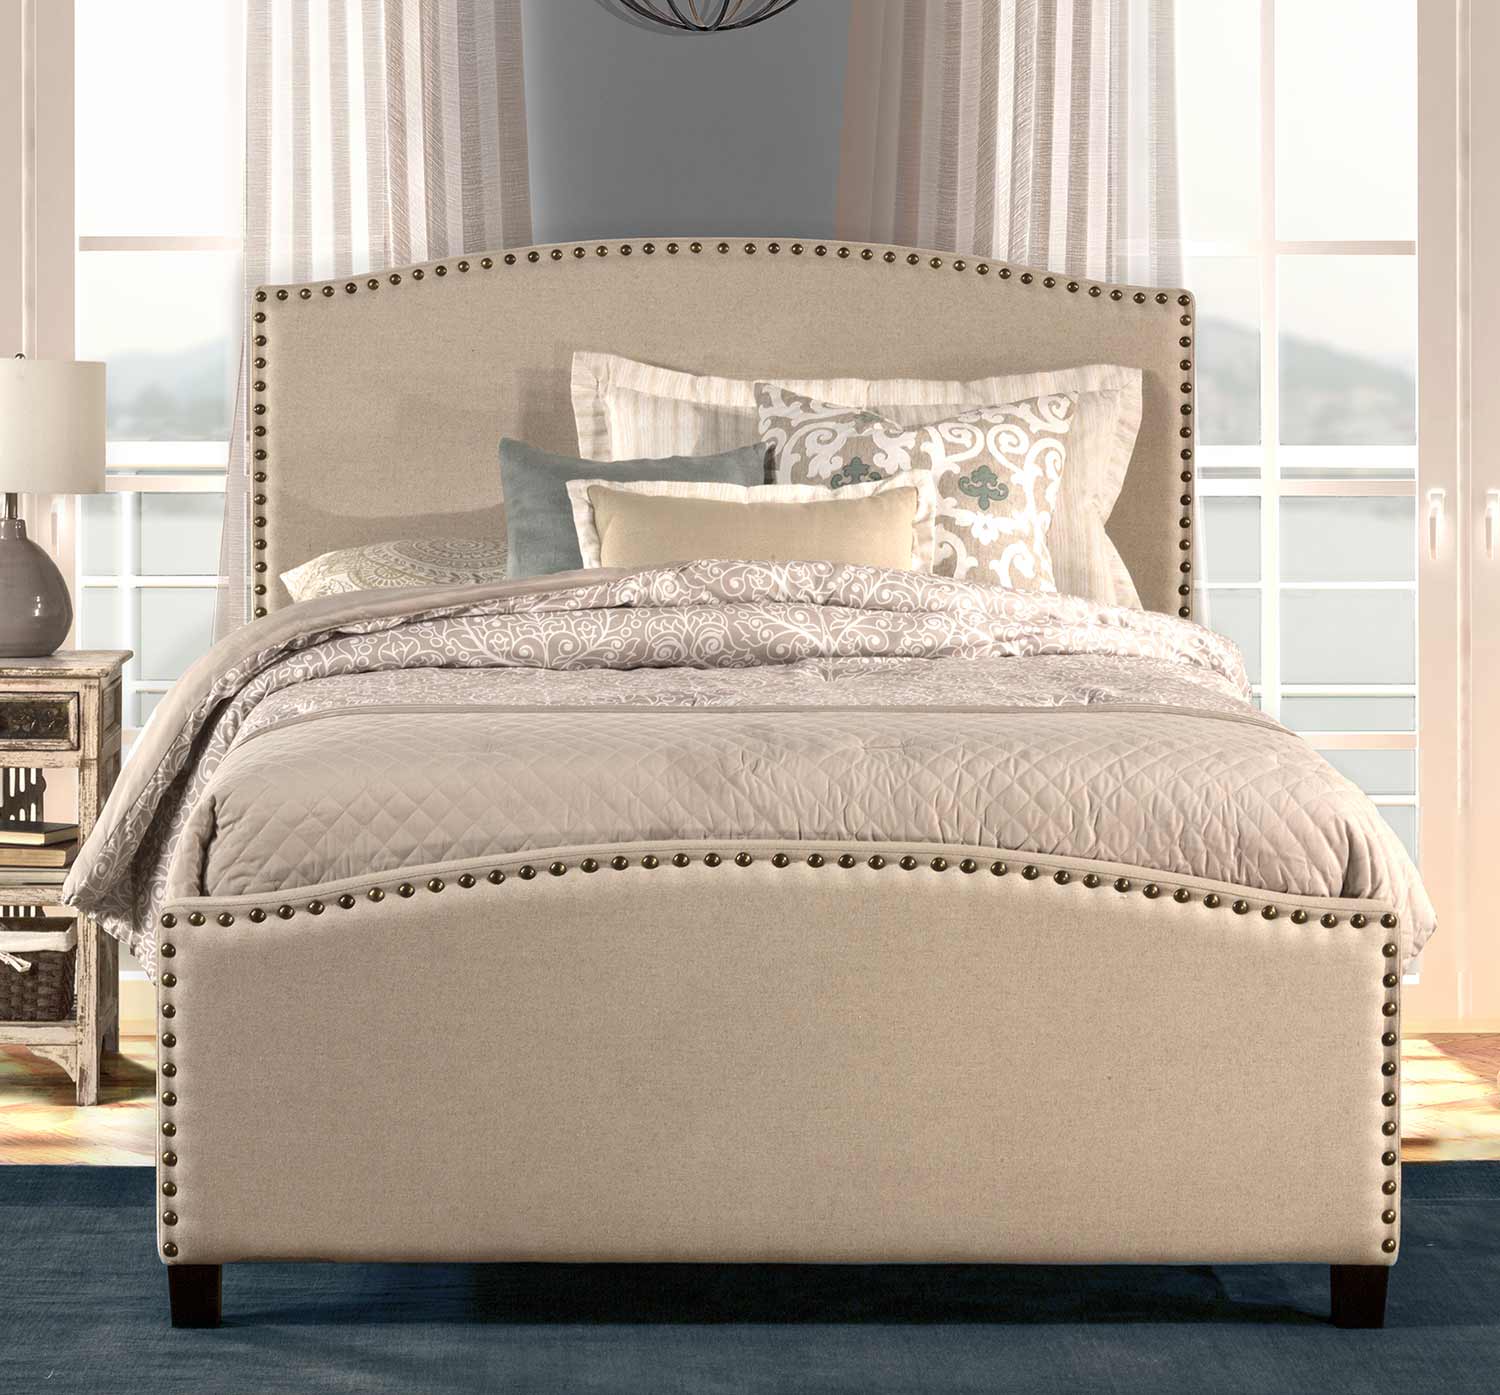 Hillsdale Kerstein Bed - Light Taupe